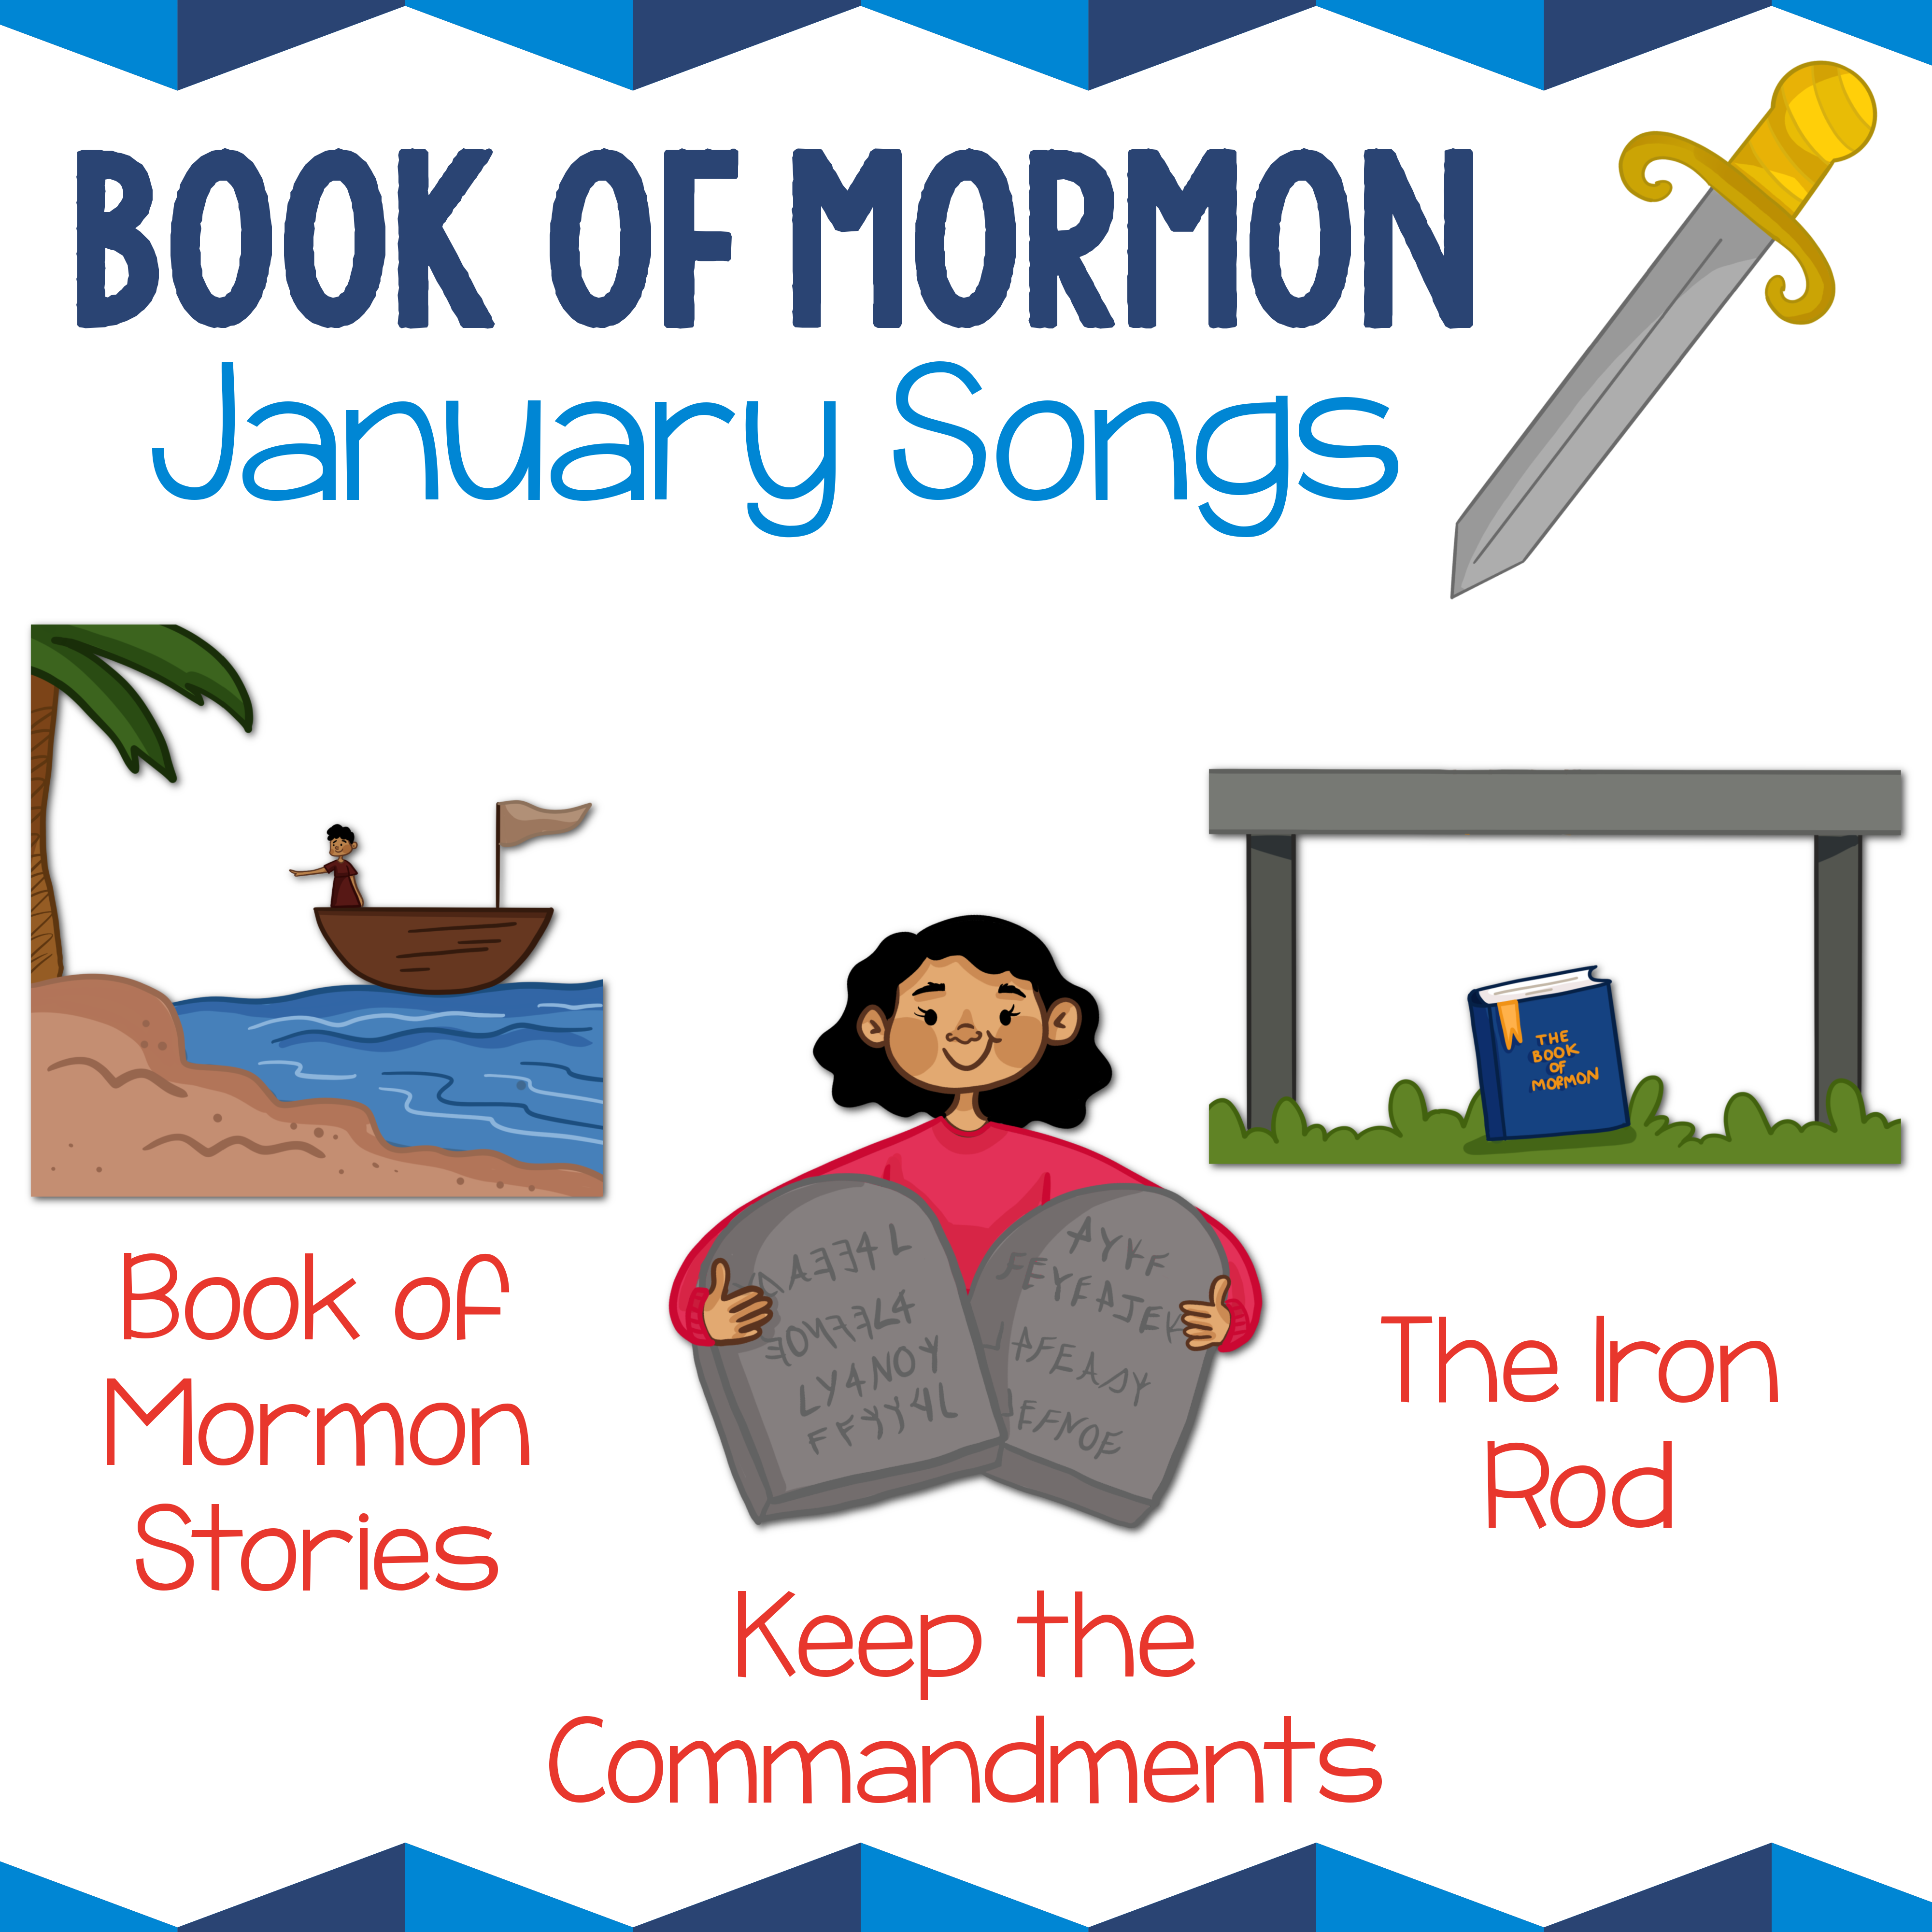 Book of Mormon January Song List - Book of Mormon Stories, Keep the Commandments, and The Iron Rod. Teach these 3 great Primary songs during Singing Time or home Come Follow Me lessons.